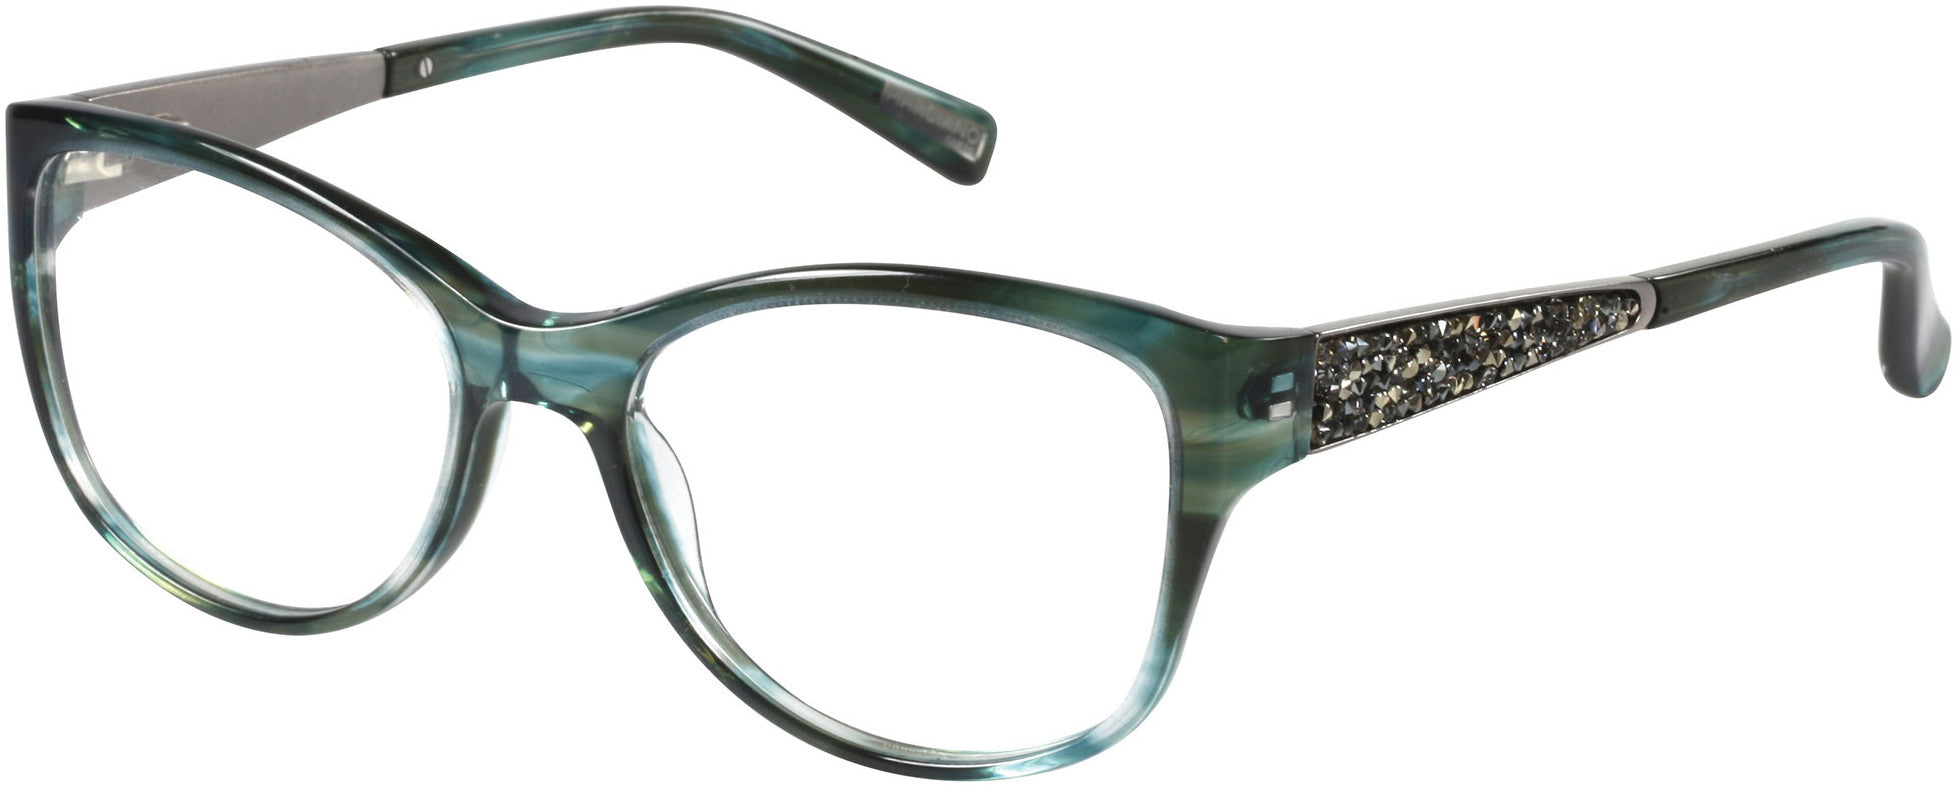 Guess By Marciano GM0244 Cat Eyeglasses I33-I33 - Green